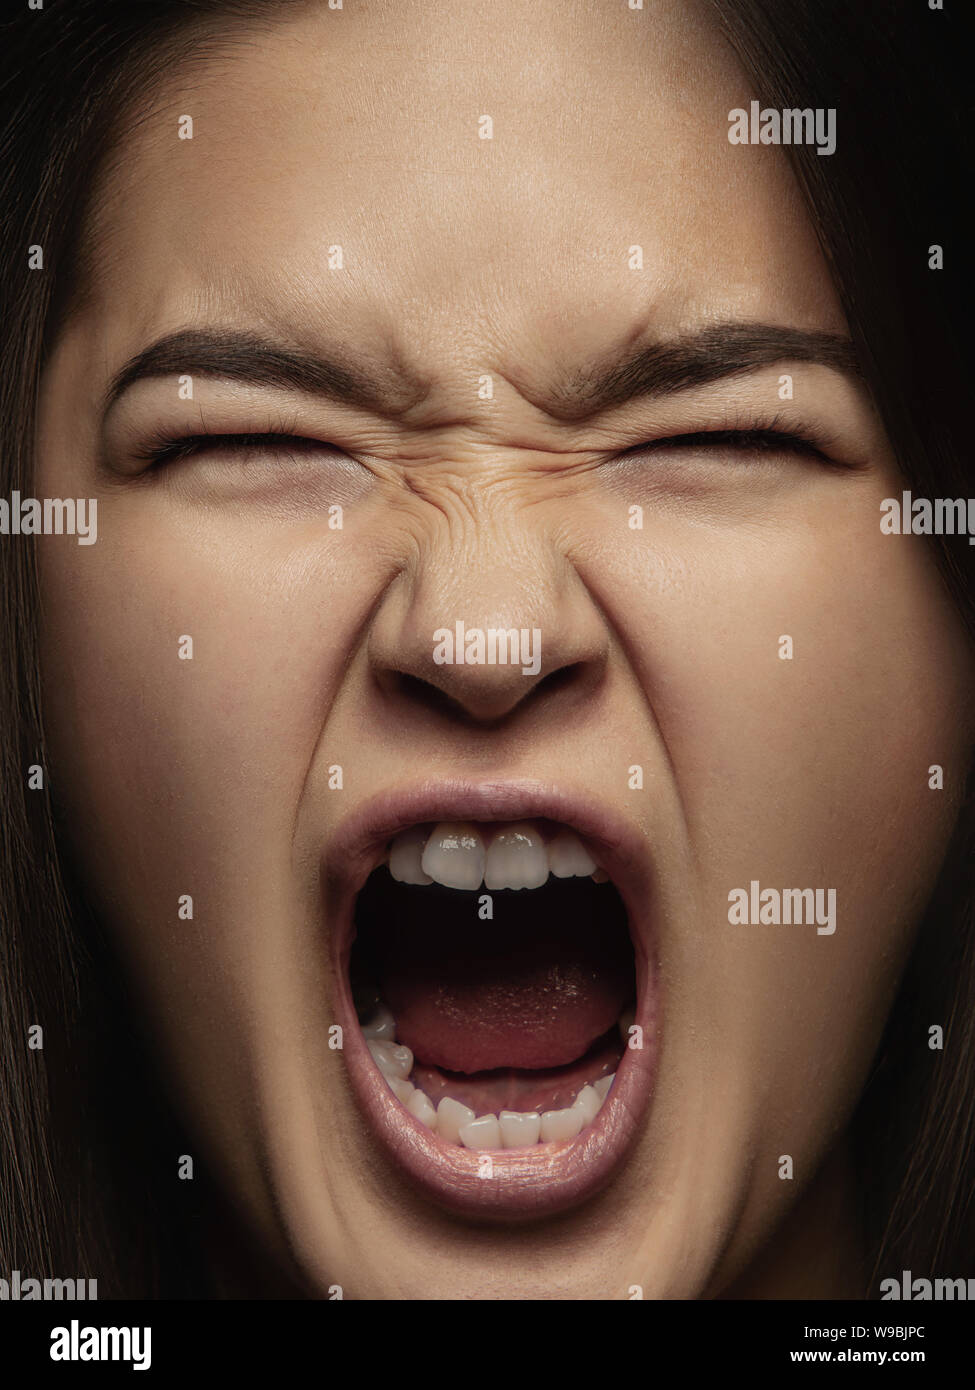 Close up portrait of young and emotional chinese woman. Highly detail photoshot of female model with well-kept skin and bright facial expression. Concept of human emotions. Angry screaming. Stock Photo